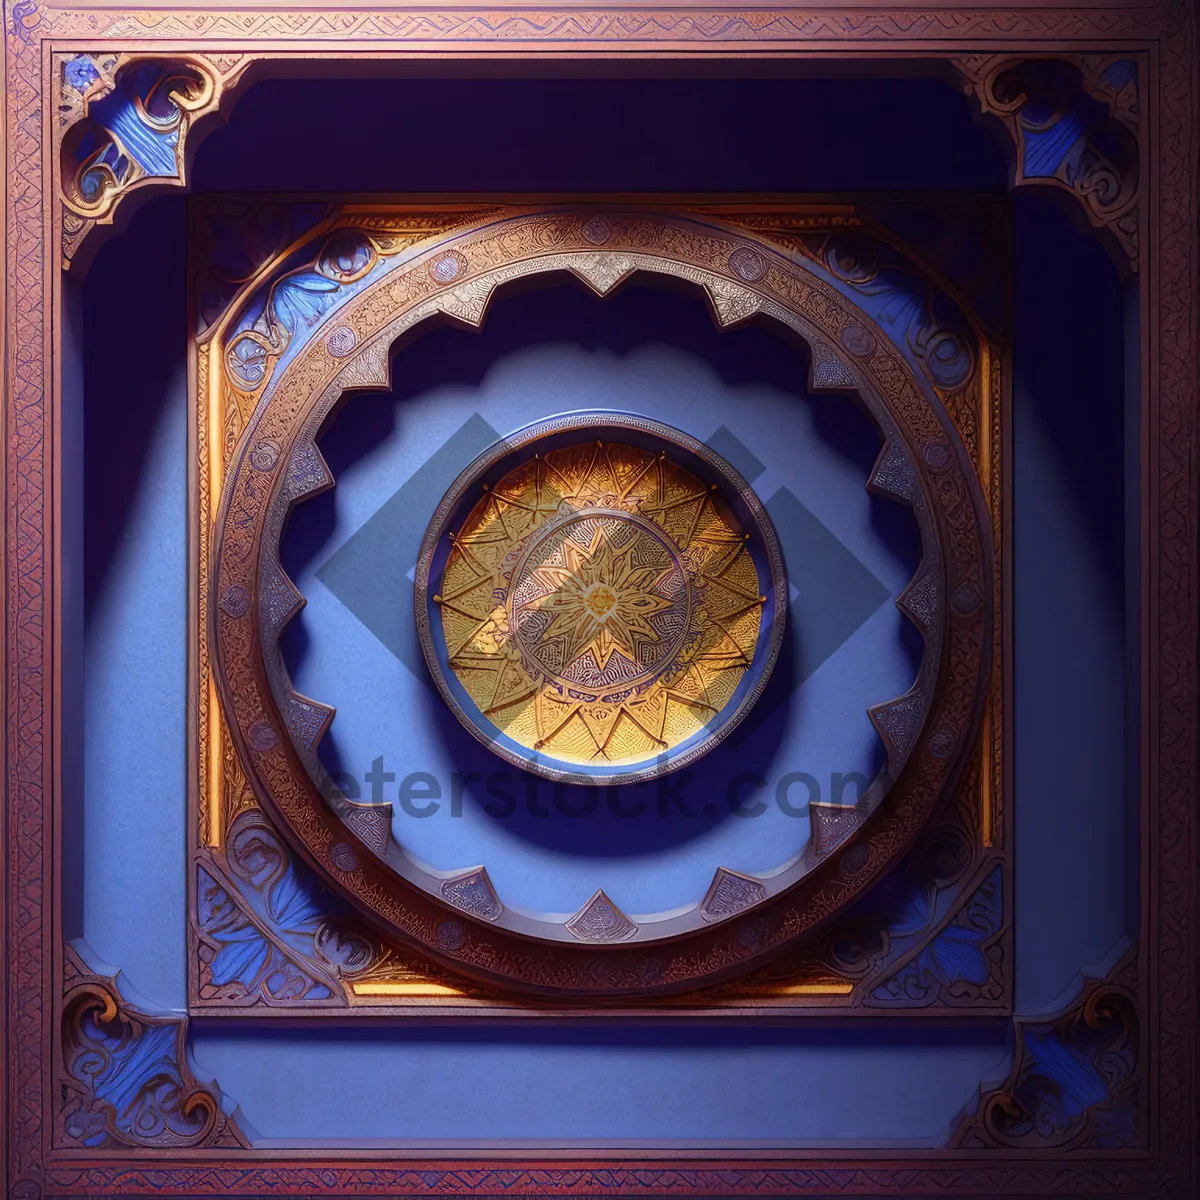 Picture of Retro Window Art: Antique Gong Design with Decorative Framework